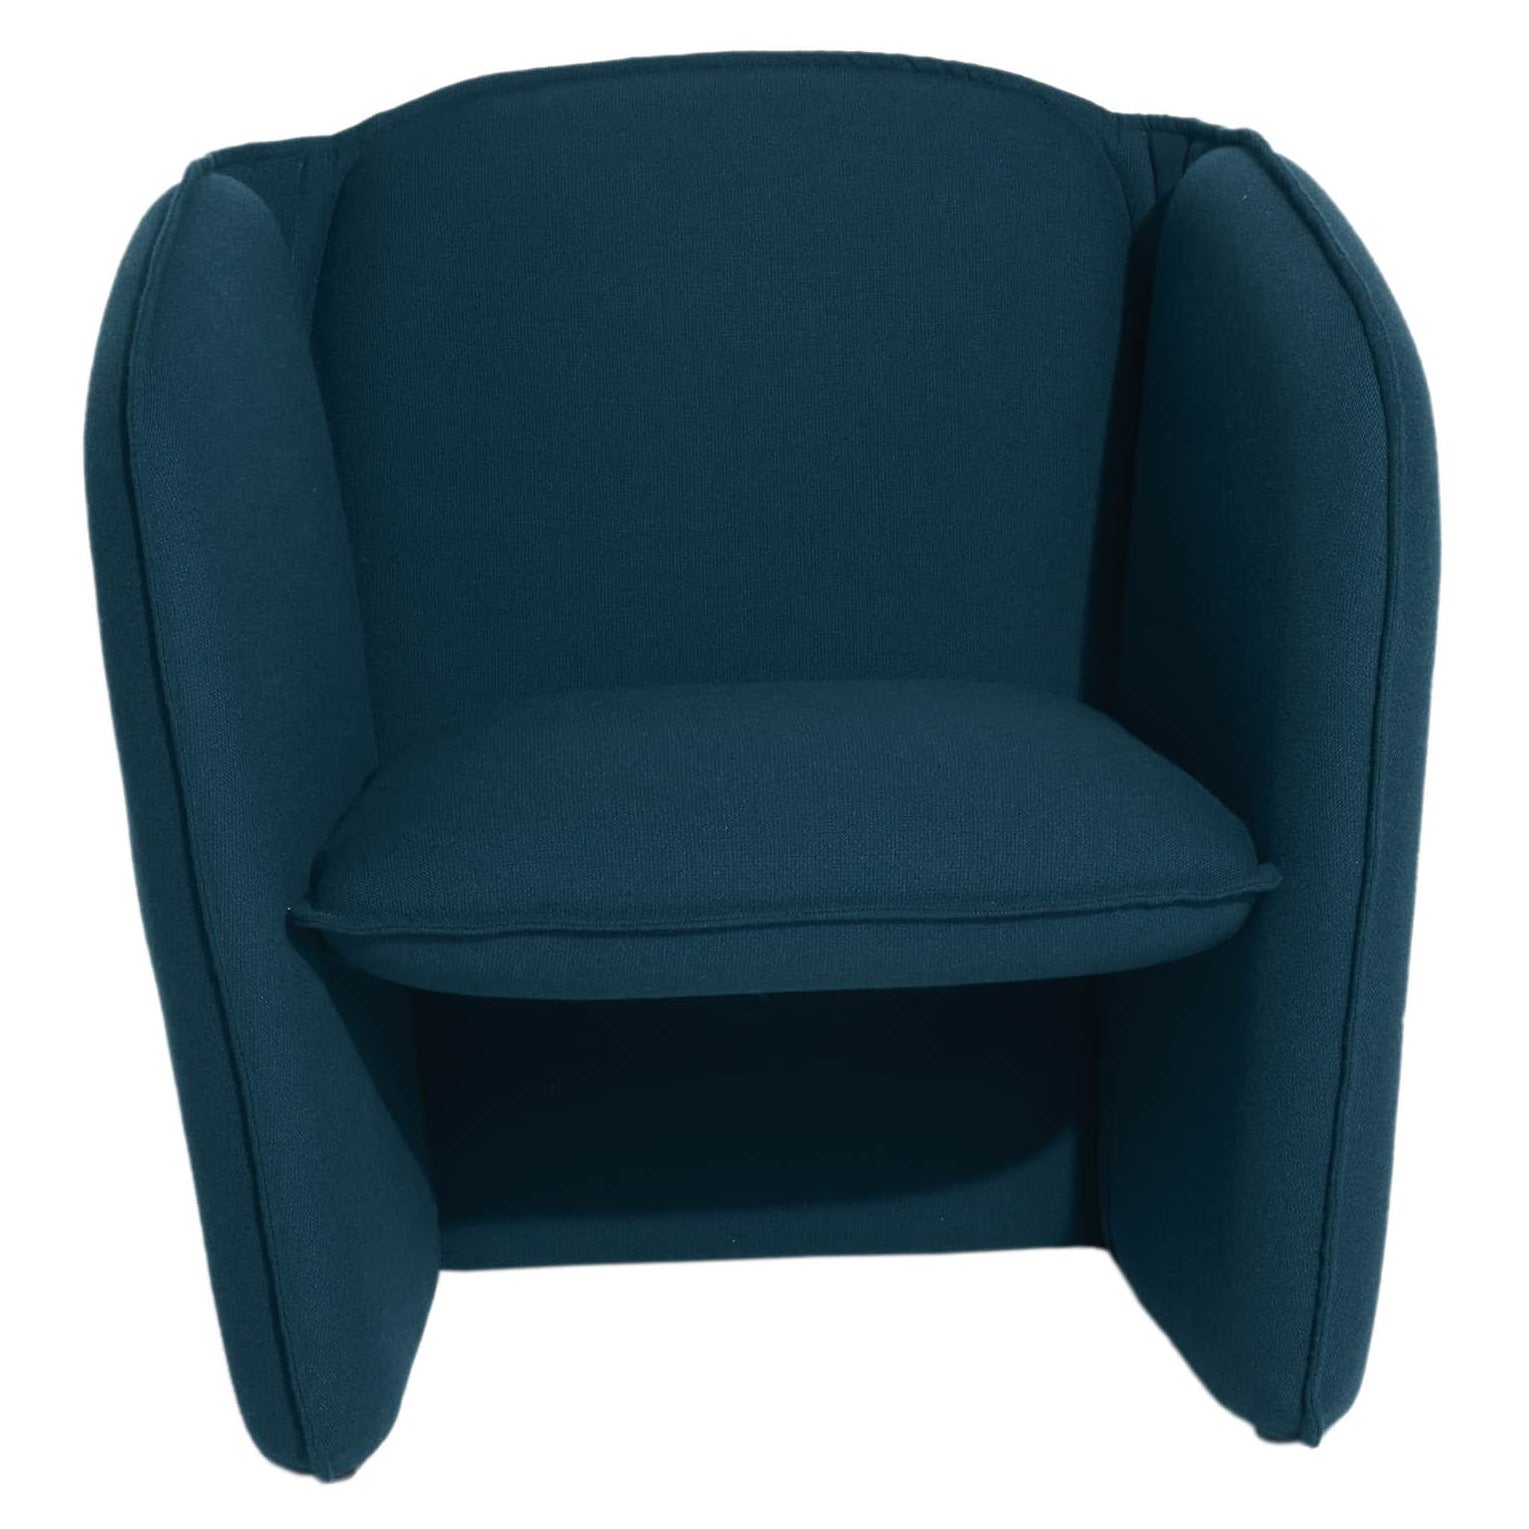 Petite Friture Lily Armchair in Navy Blue by Färg & Blanche, 2022 For Sale